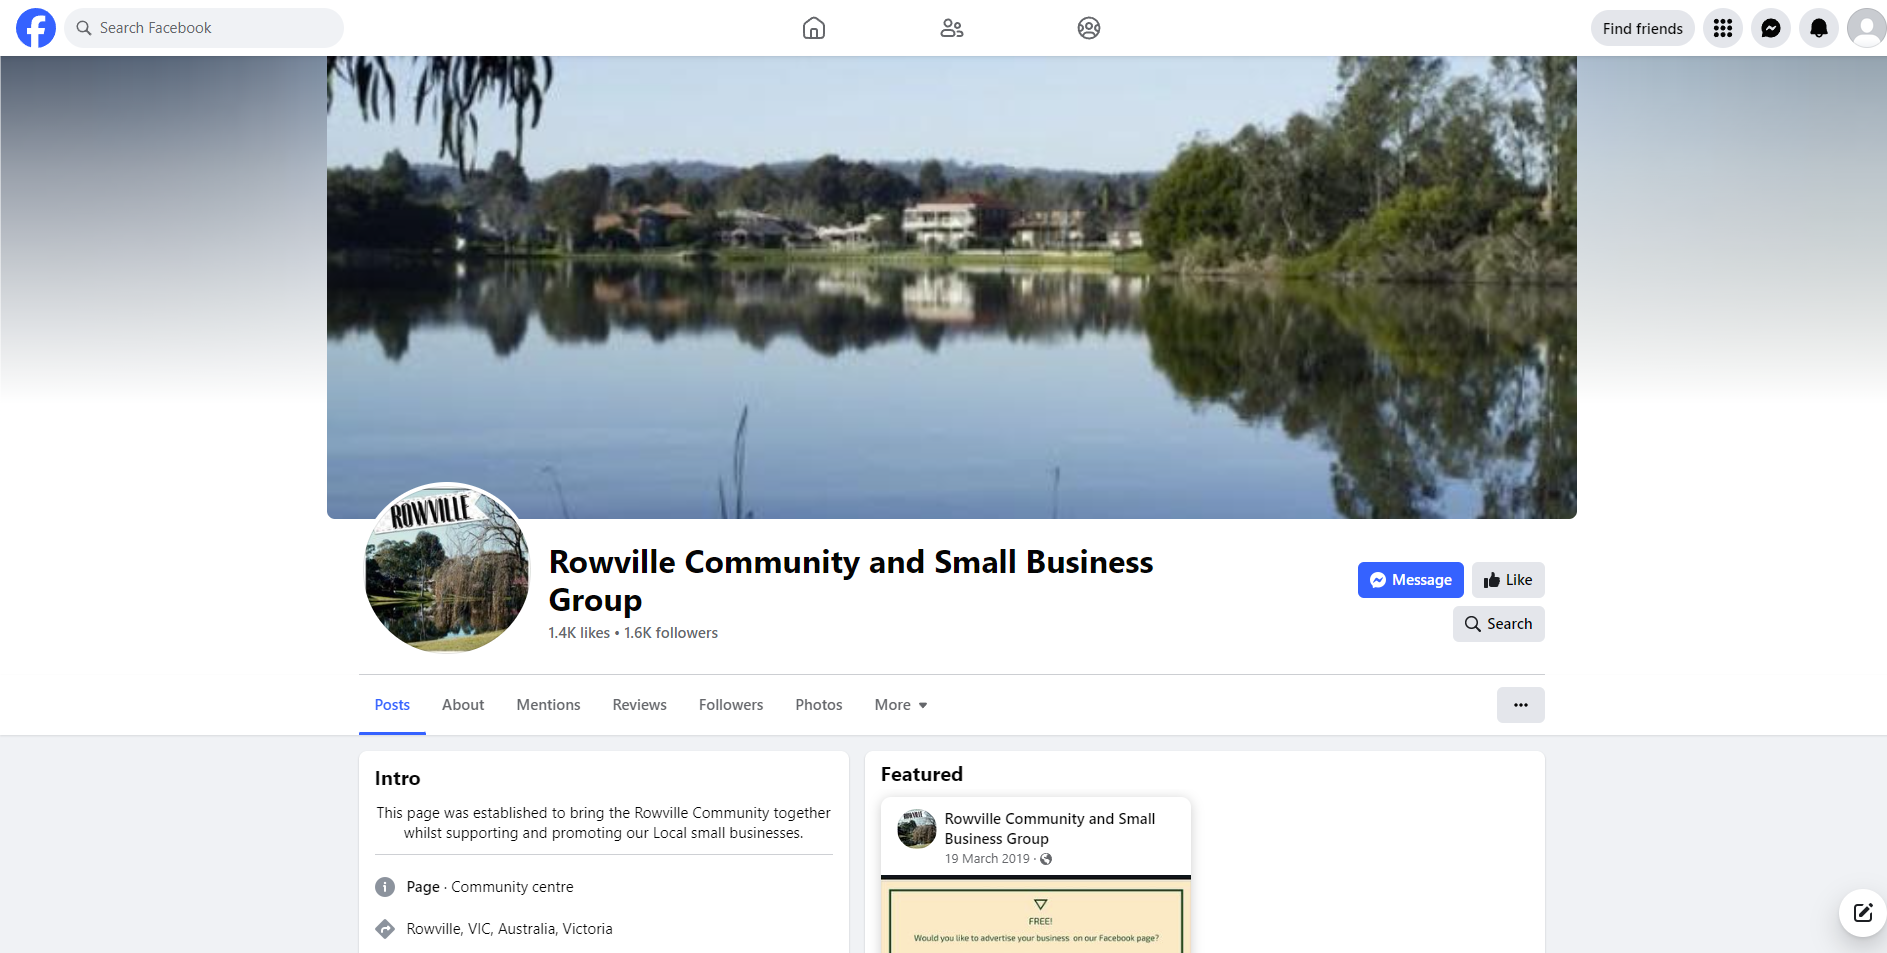 Rowville Community and Small Business Group